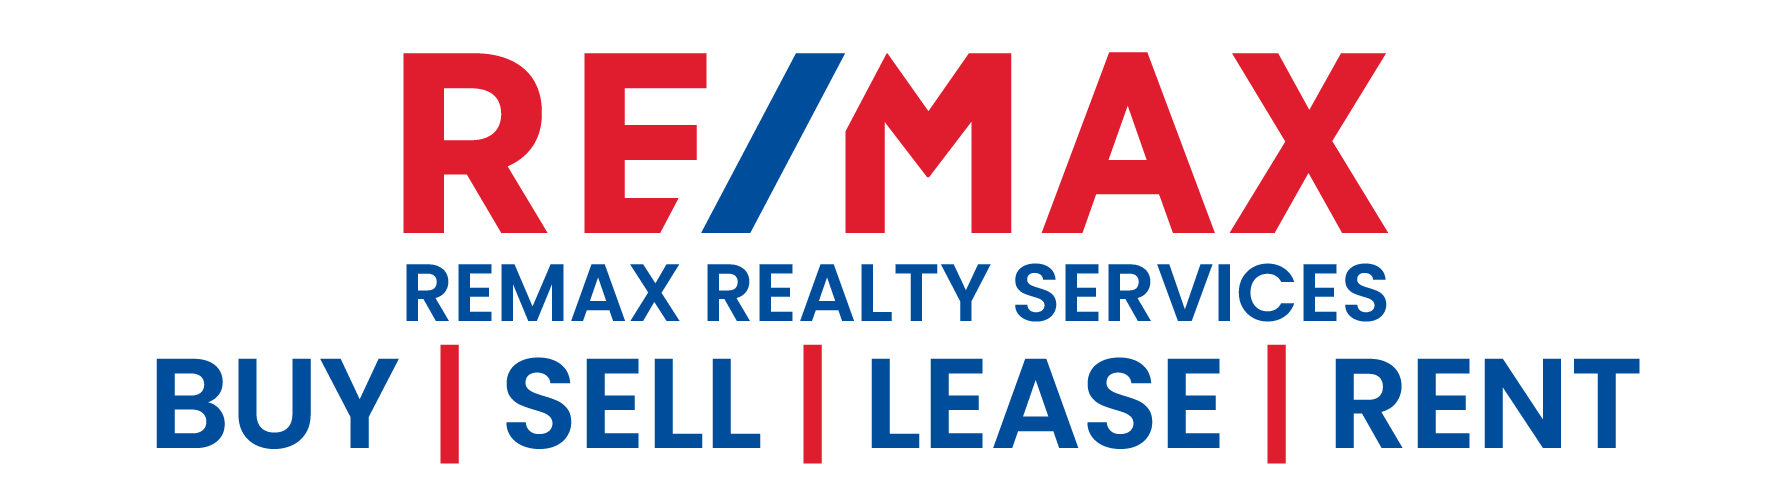 RE/MAX Realty Services: Buy/Sale/Rent Top Residential, Commercial ...